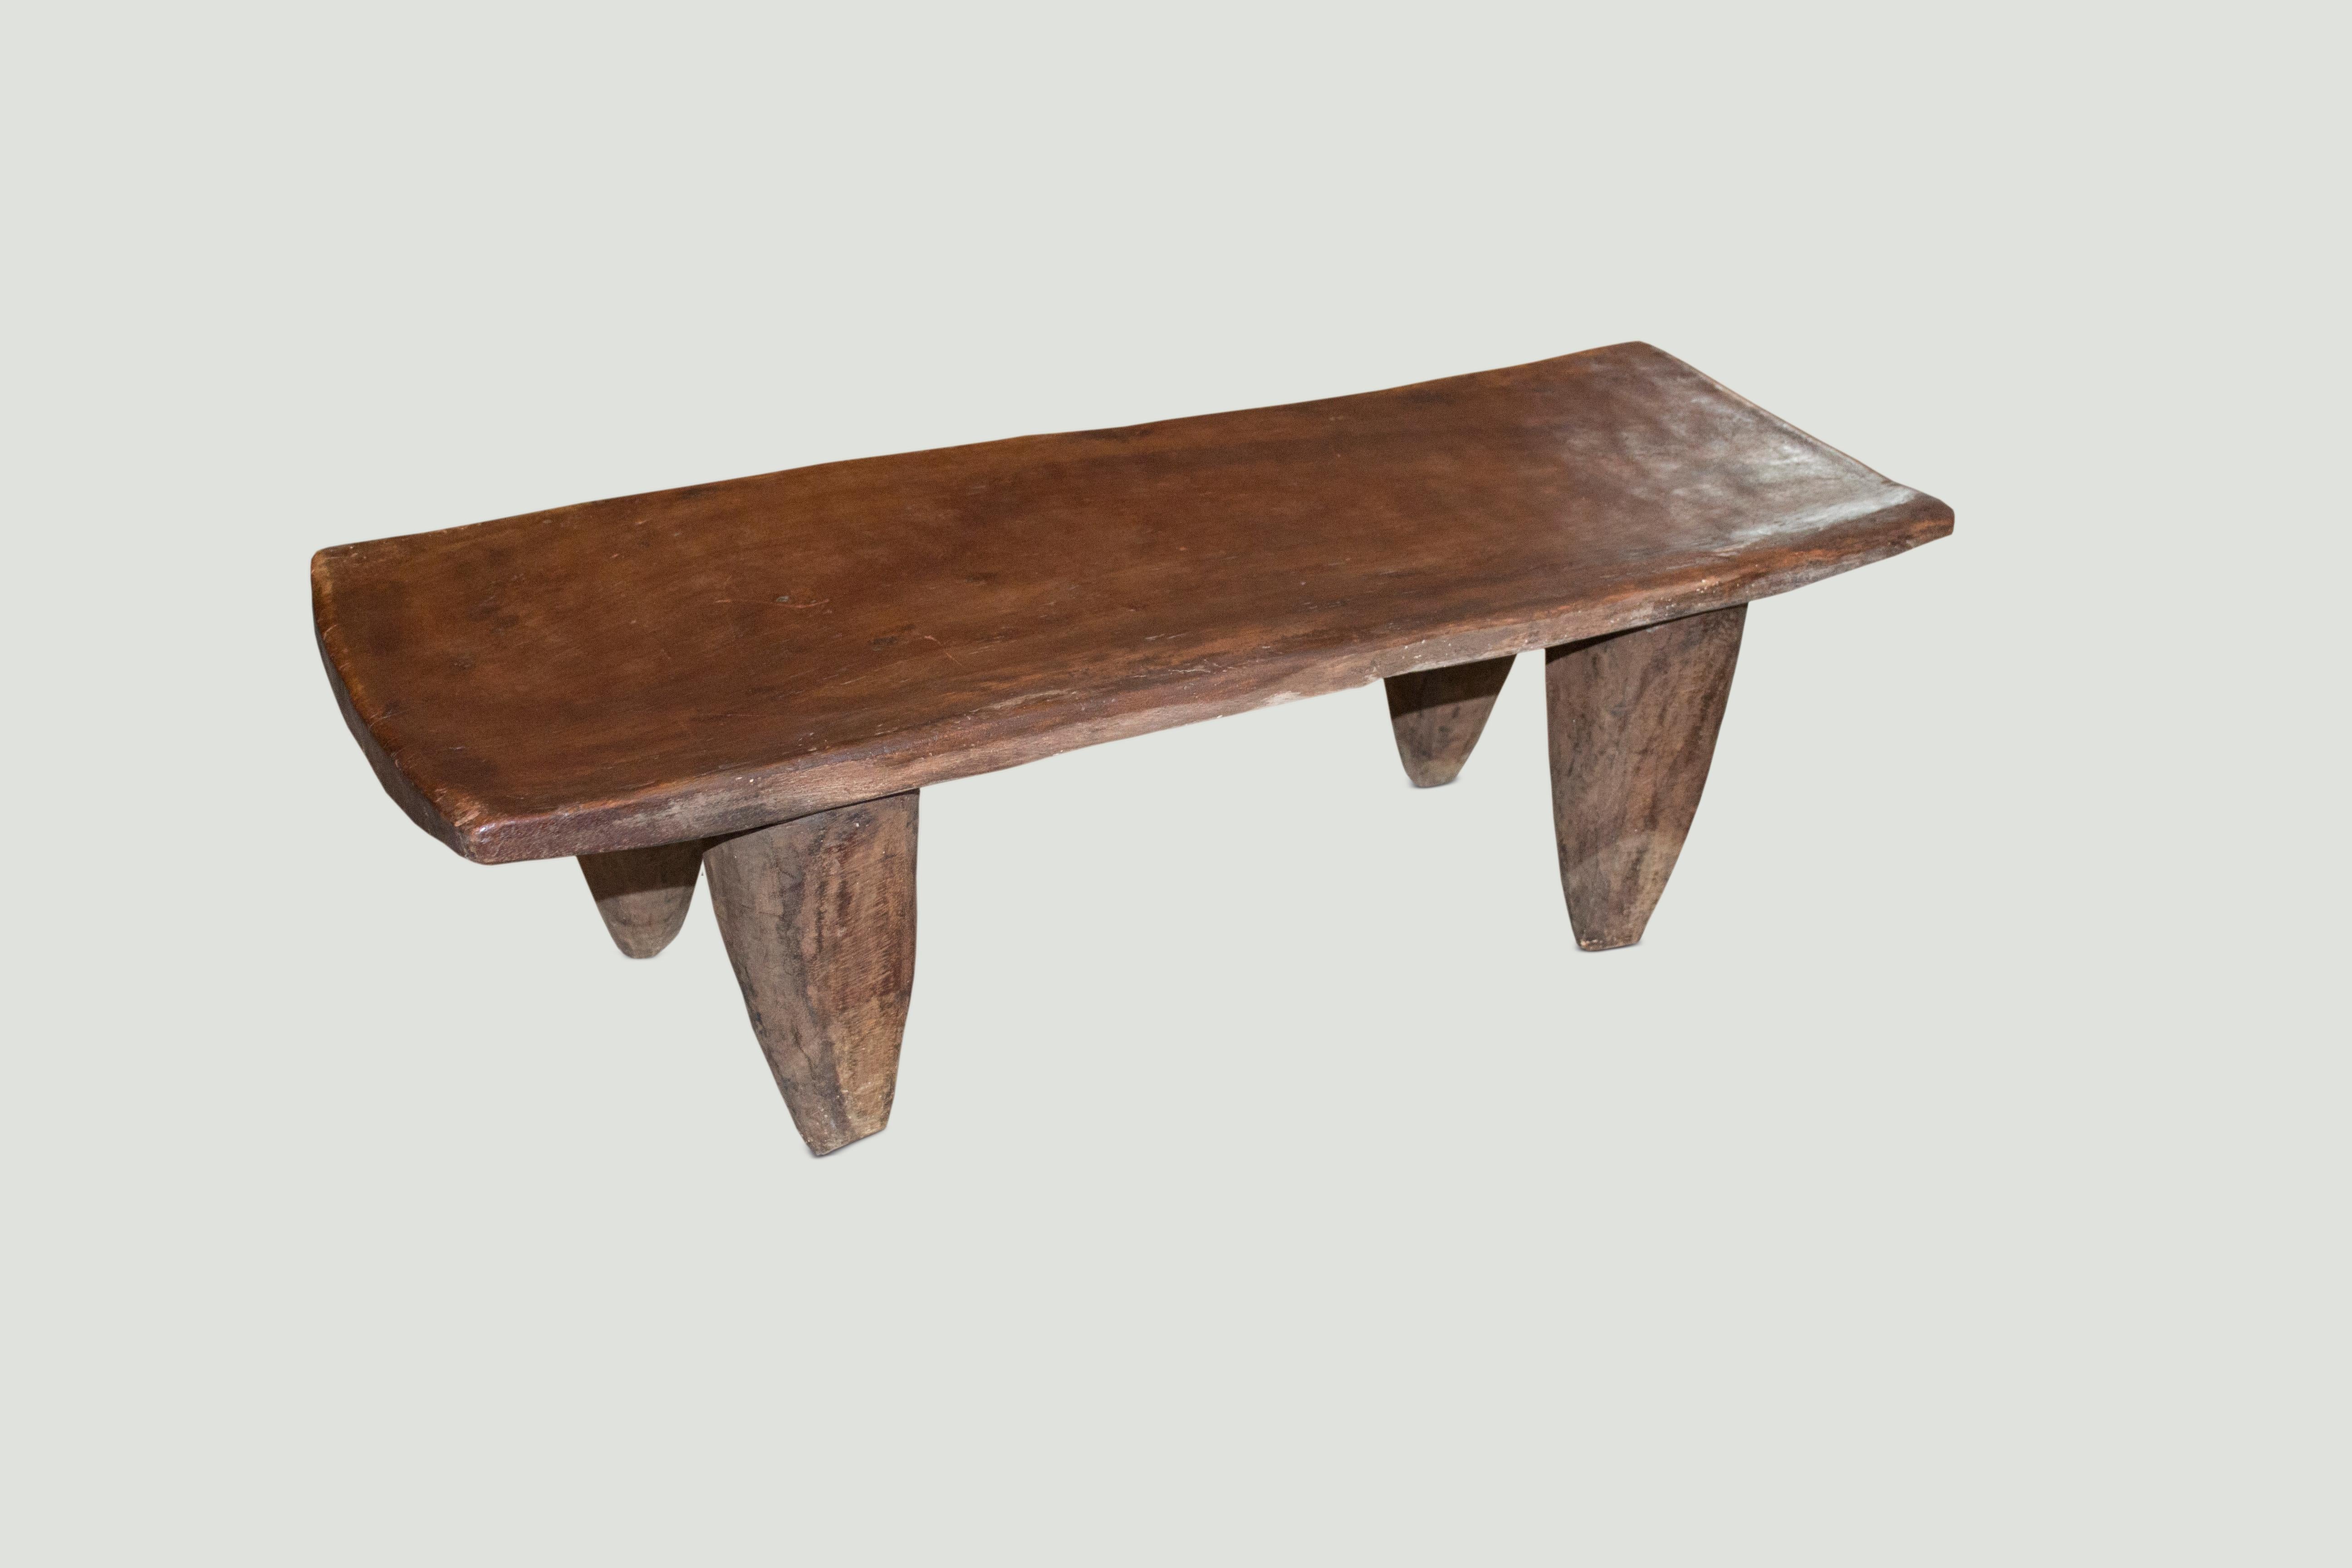 Primitive Mahogany Wood African Bench or Coffee Table